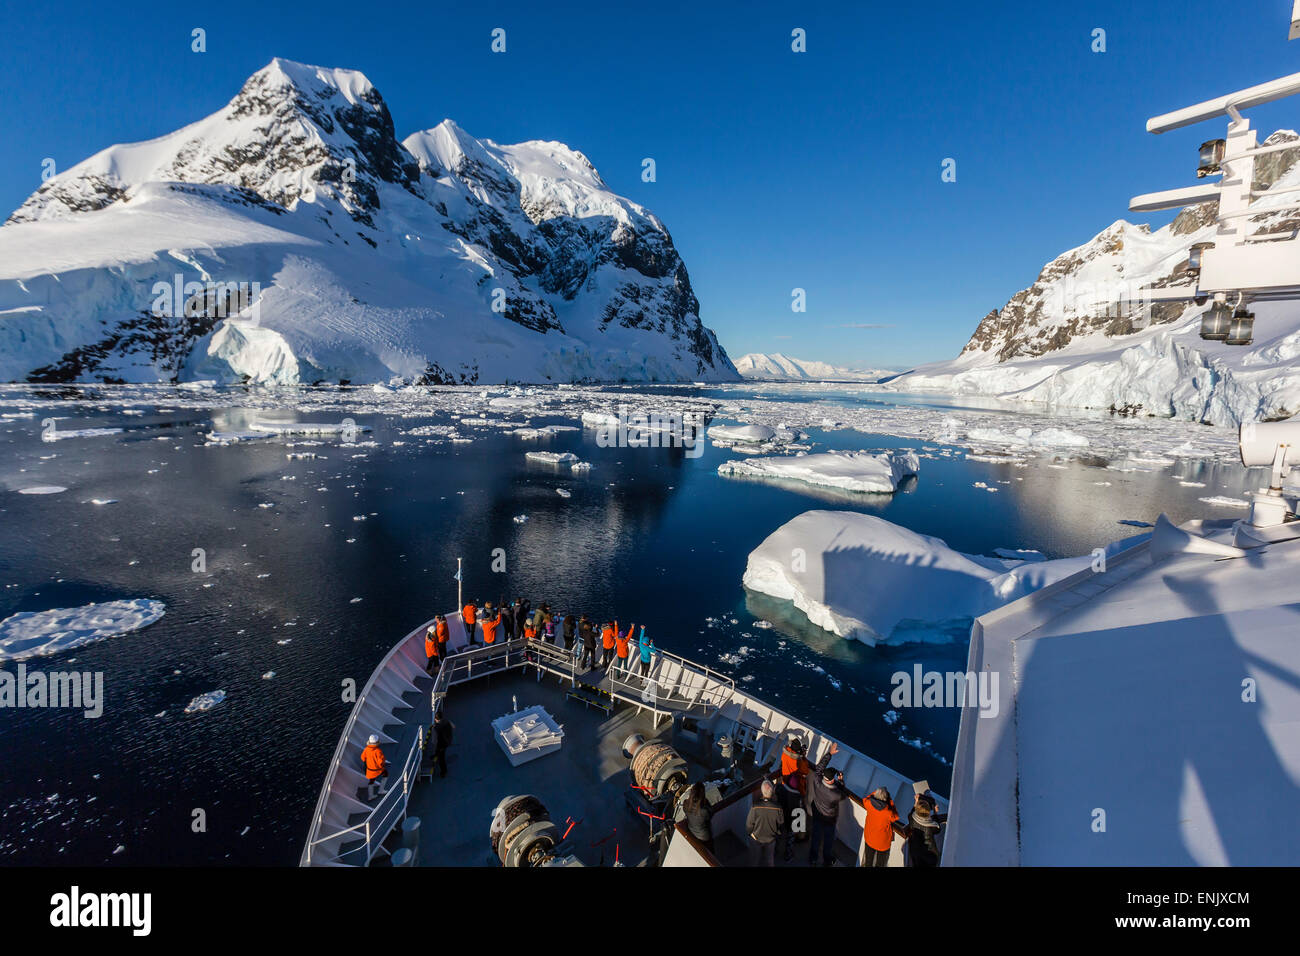 The Lindblad Expeditions ship National Geographic Explorer in the Lemaire Channel, Antarctica, Polar Regions Stock Photo